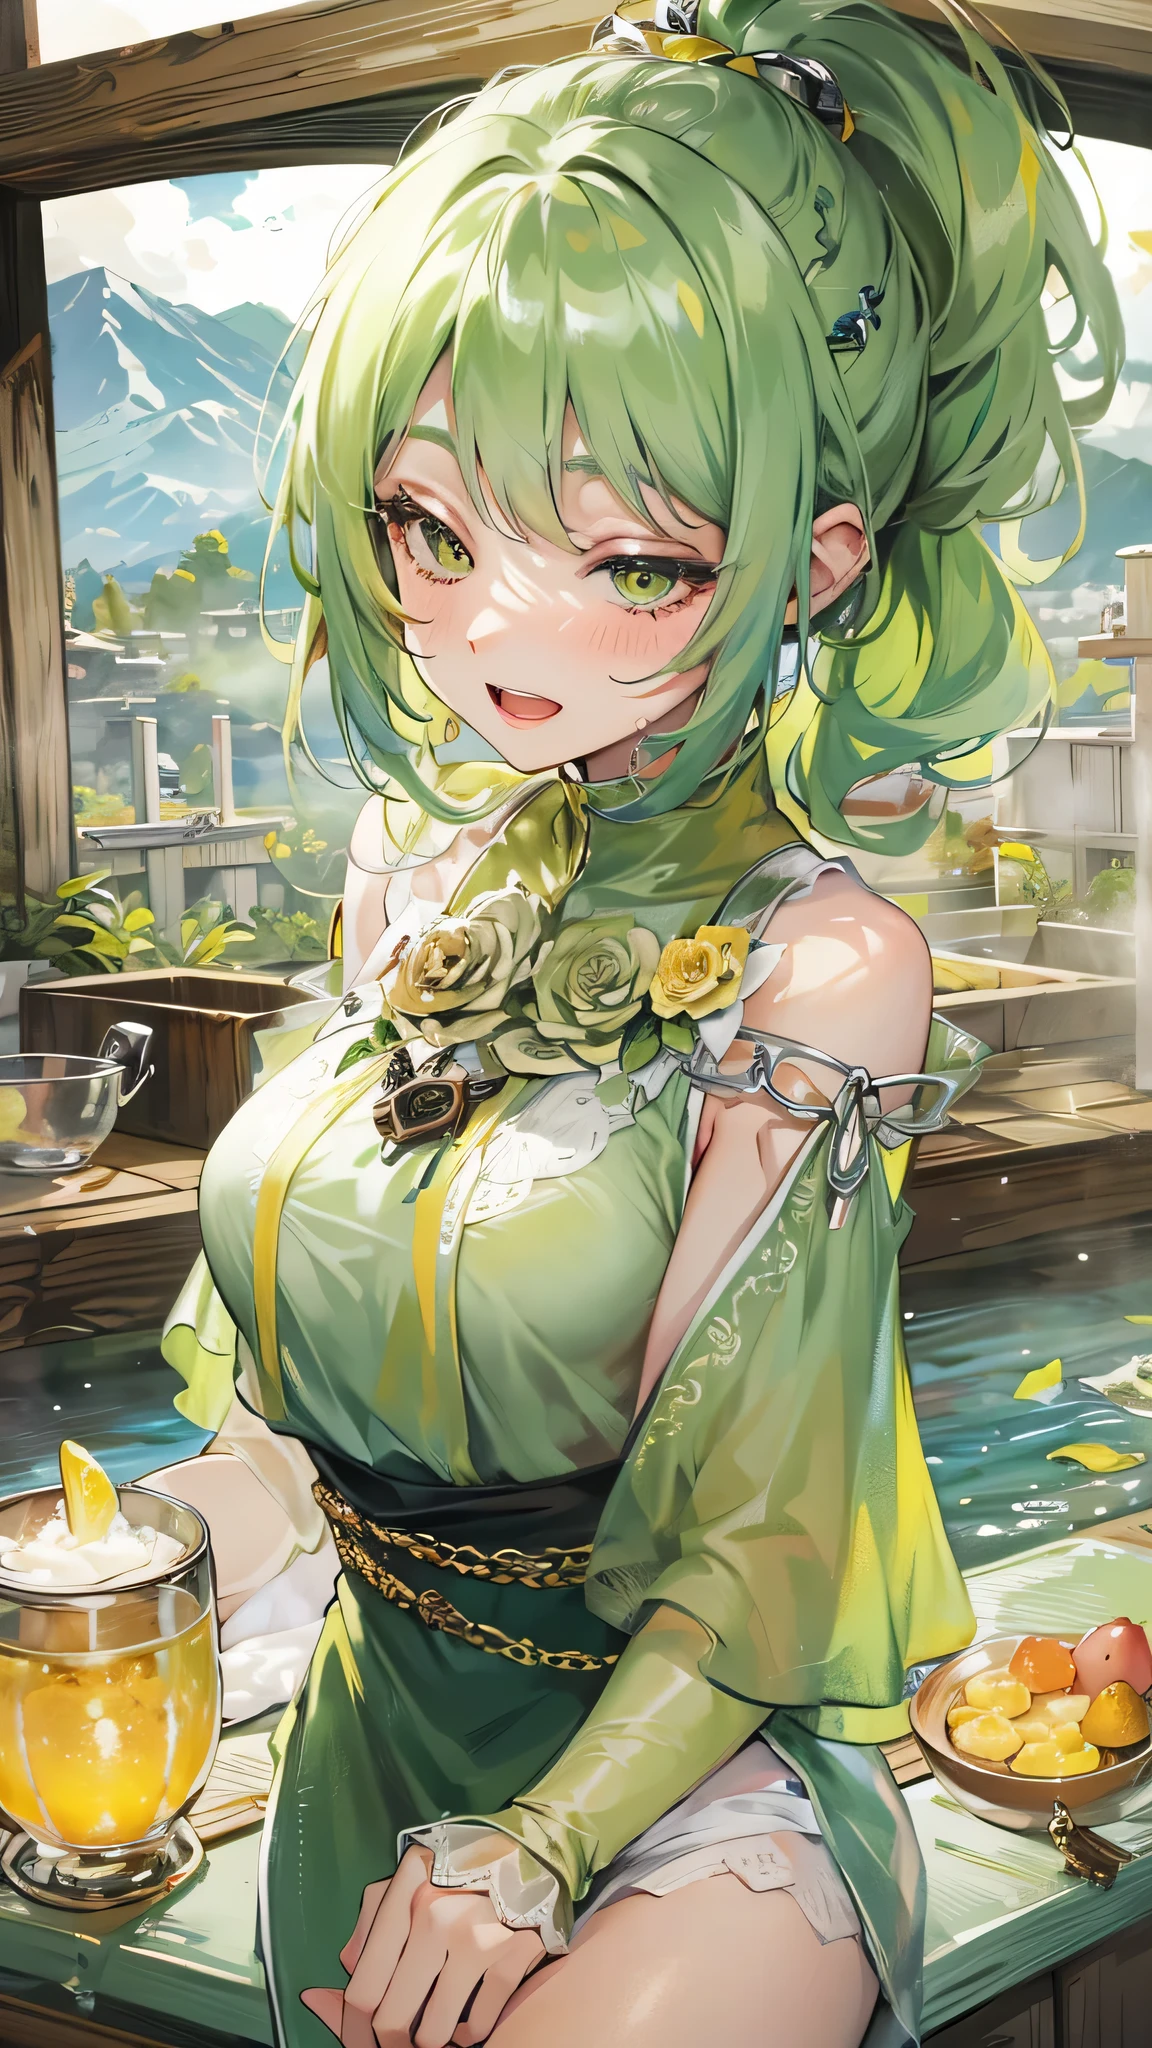 perfect anatomy, masterpiece:1.4, best highres, 16k, (the background is Hot Spring Town), ((background many hot spring with fog)) break,  
(wide-angle, frontale:1.2) (hand holding Hot spring egg) (solo:1.3 ponytail green hair long hair cute girl), ((15 yo)), (cute closed eyes), ((beautiful make up)), (sexy smile, open mouth), break, (in a Layered yellow Off-the-shoulder dress with detailed green rose).